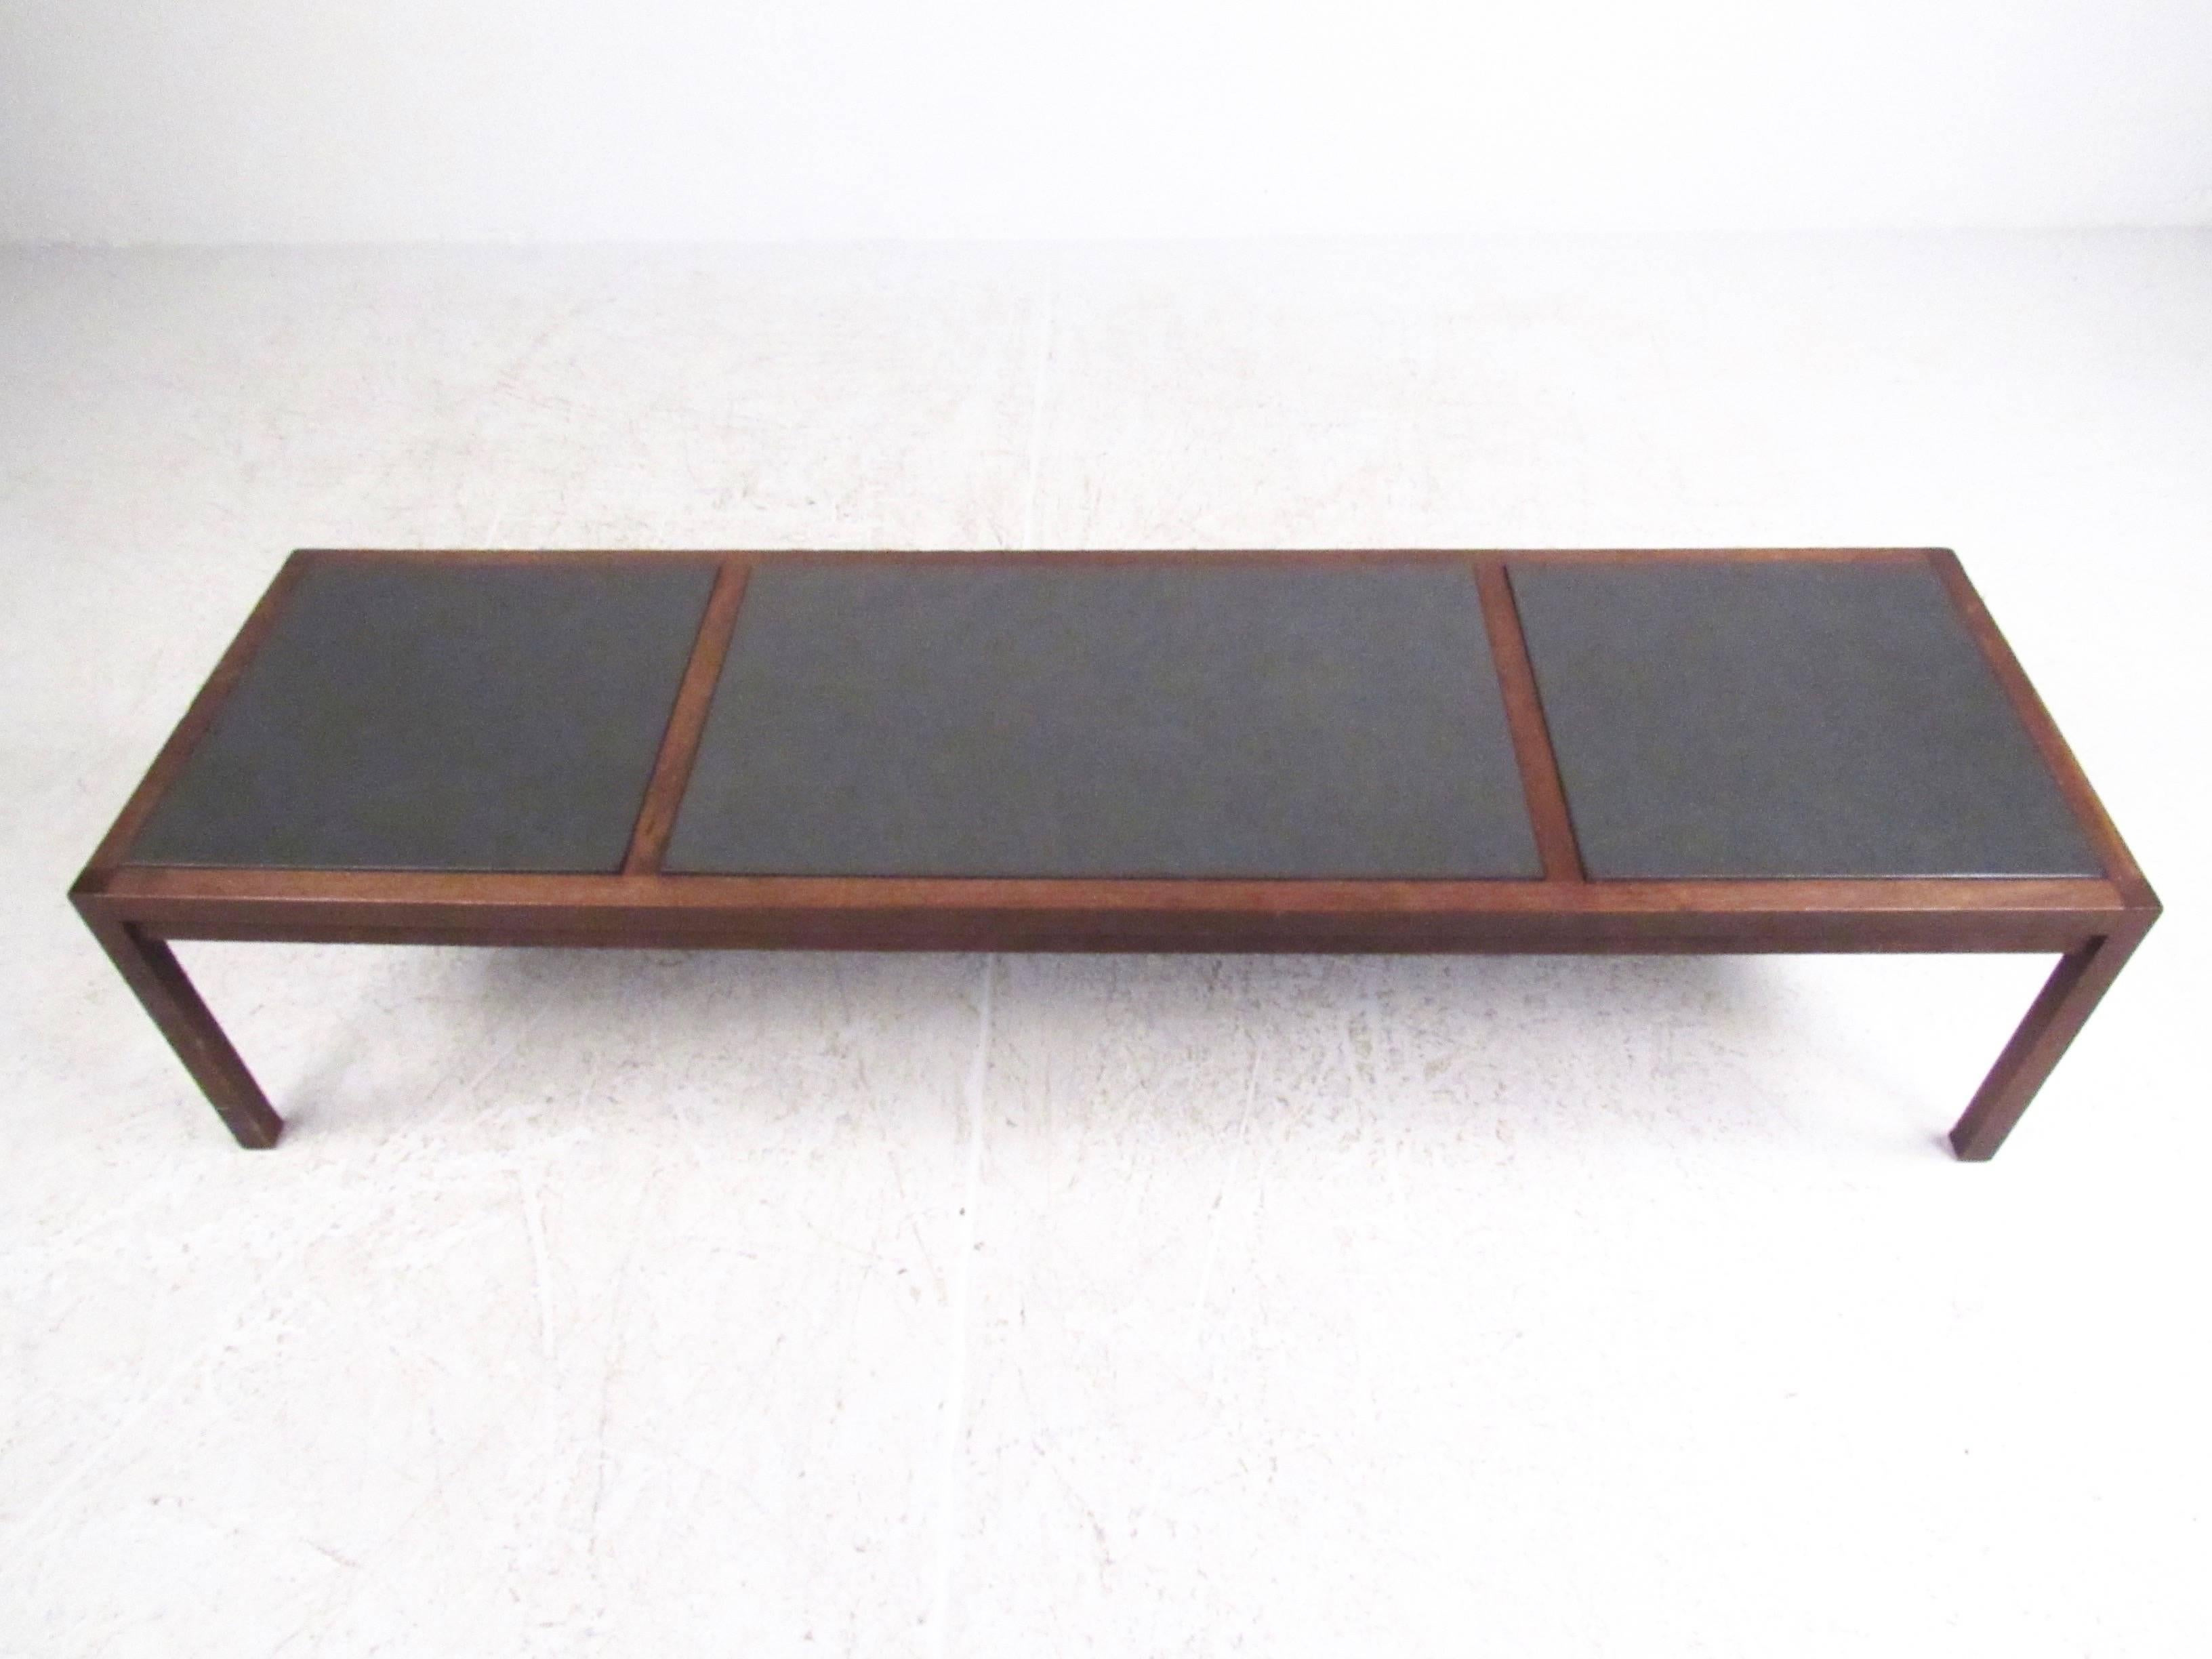 This vintage walnut framed coffee table designed by Jack Cartwright for Founders makes a stylish addition to any seating area, offering a long and low cocktail table that works great with any modern sofa. Unique removable slate inserts add texture